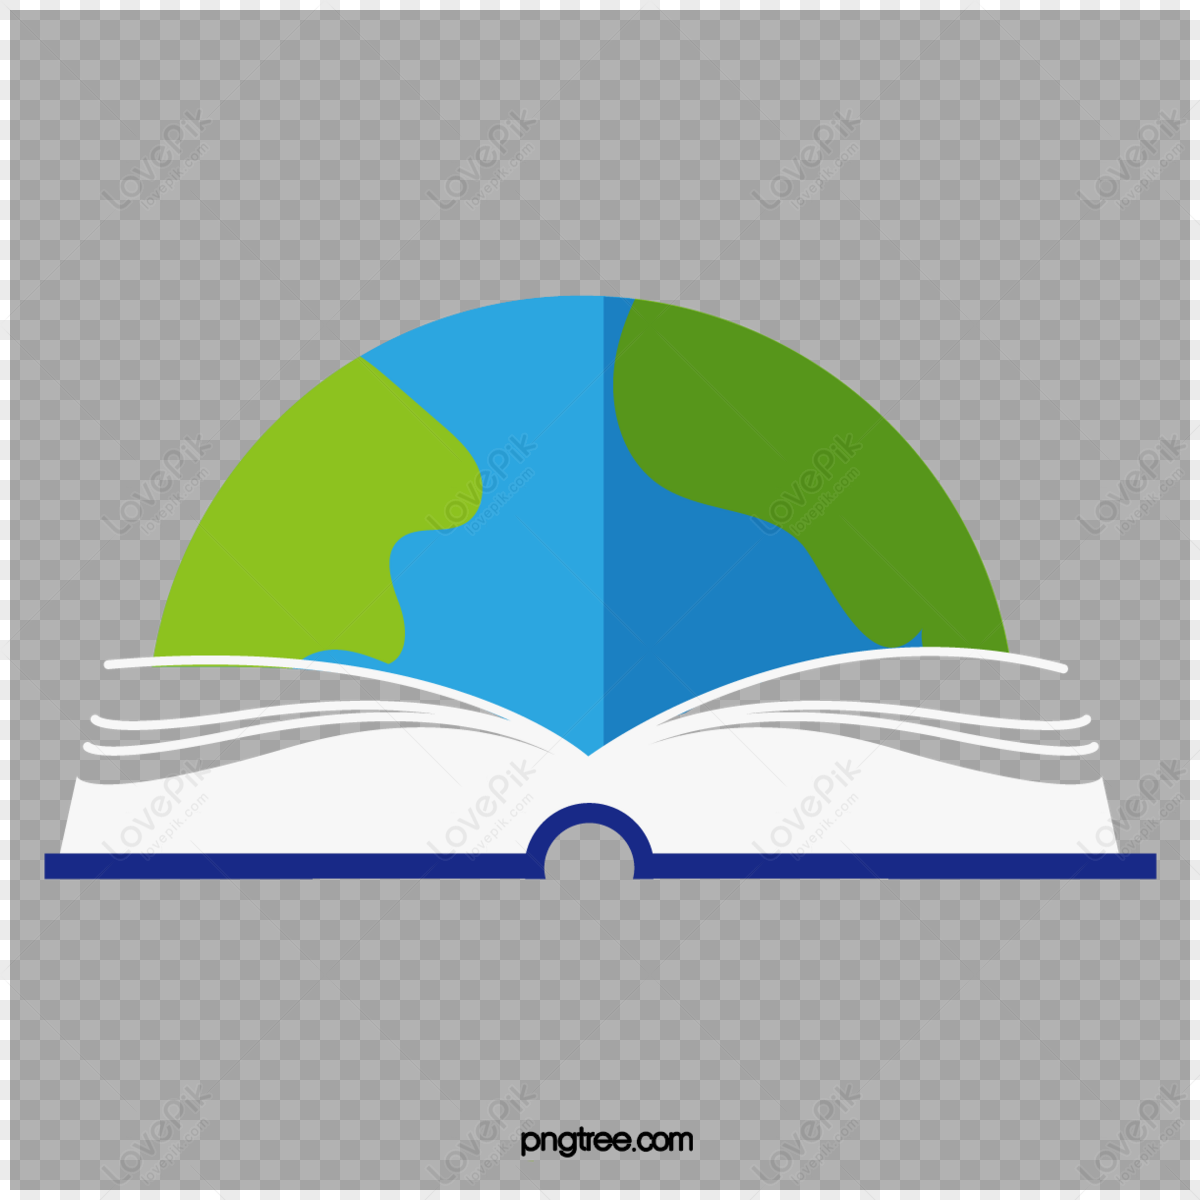 office stationery book books cartoon,student supplies,office supplies,color stationery png hd transparent image